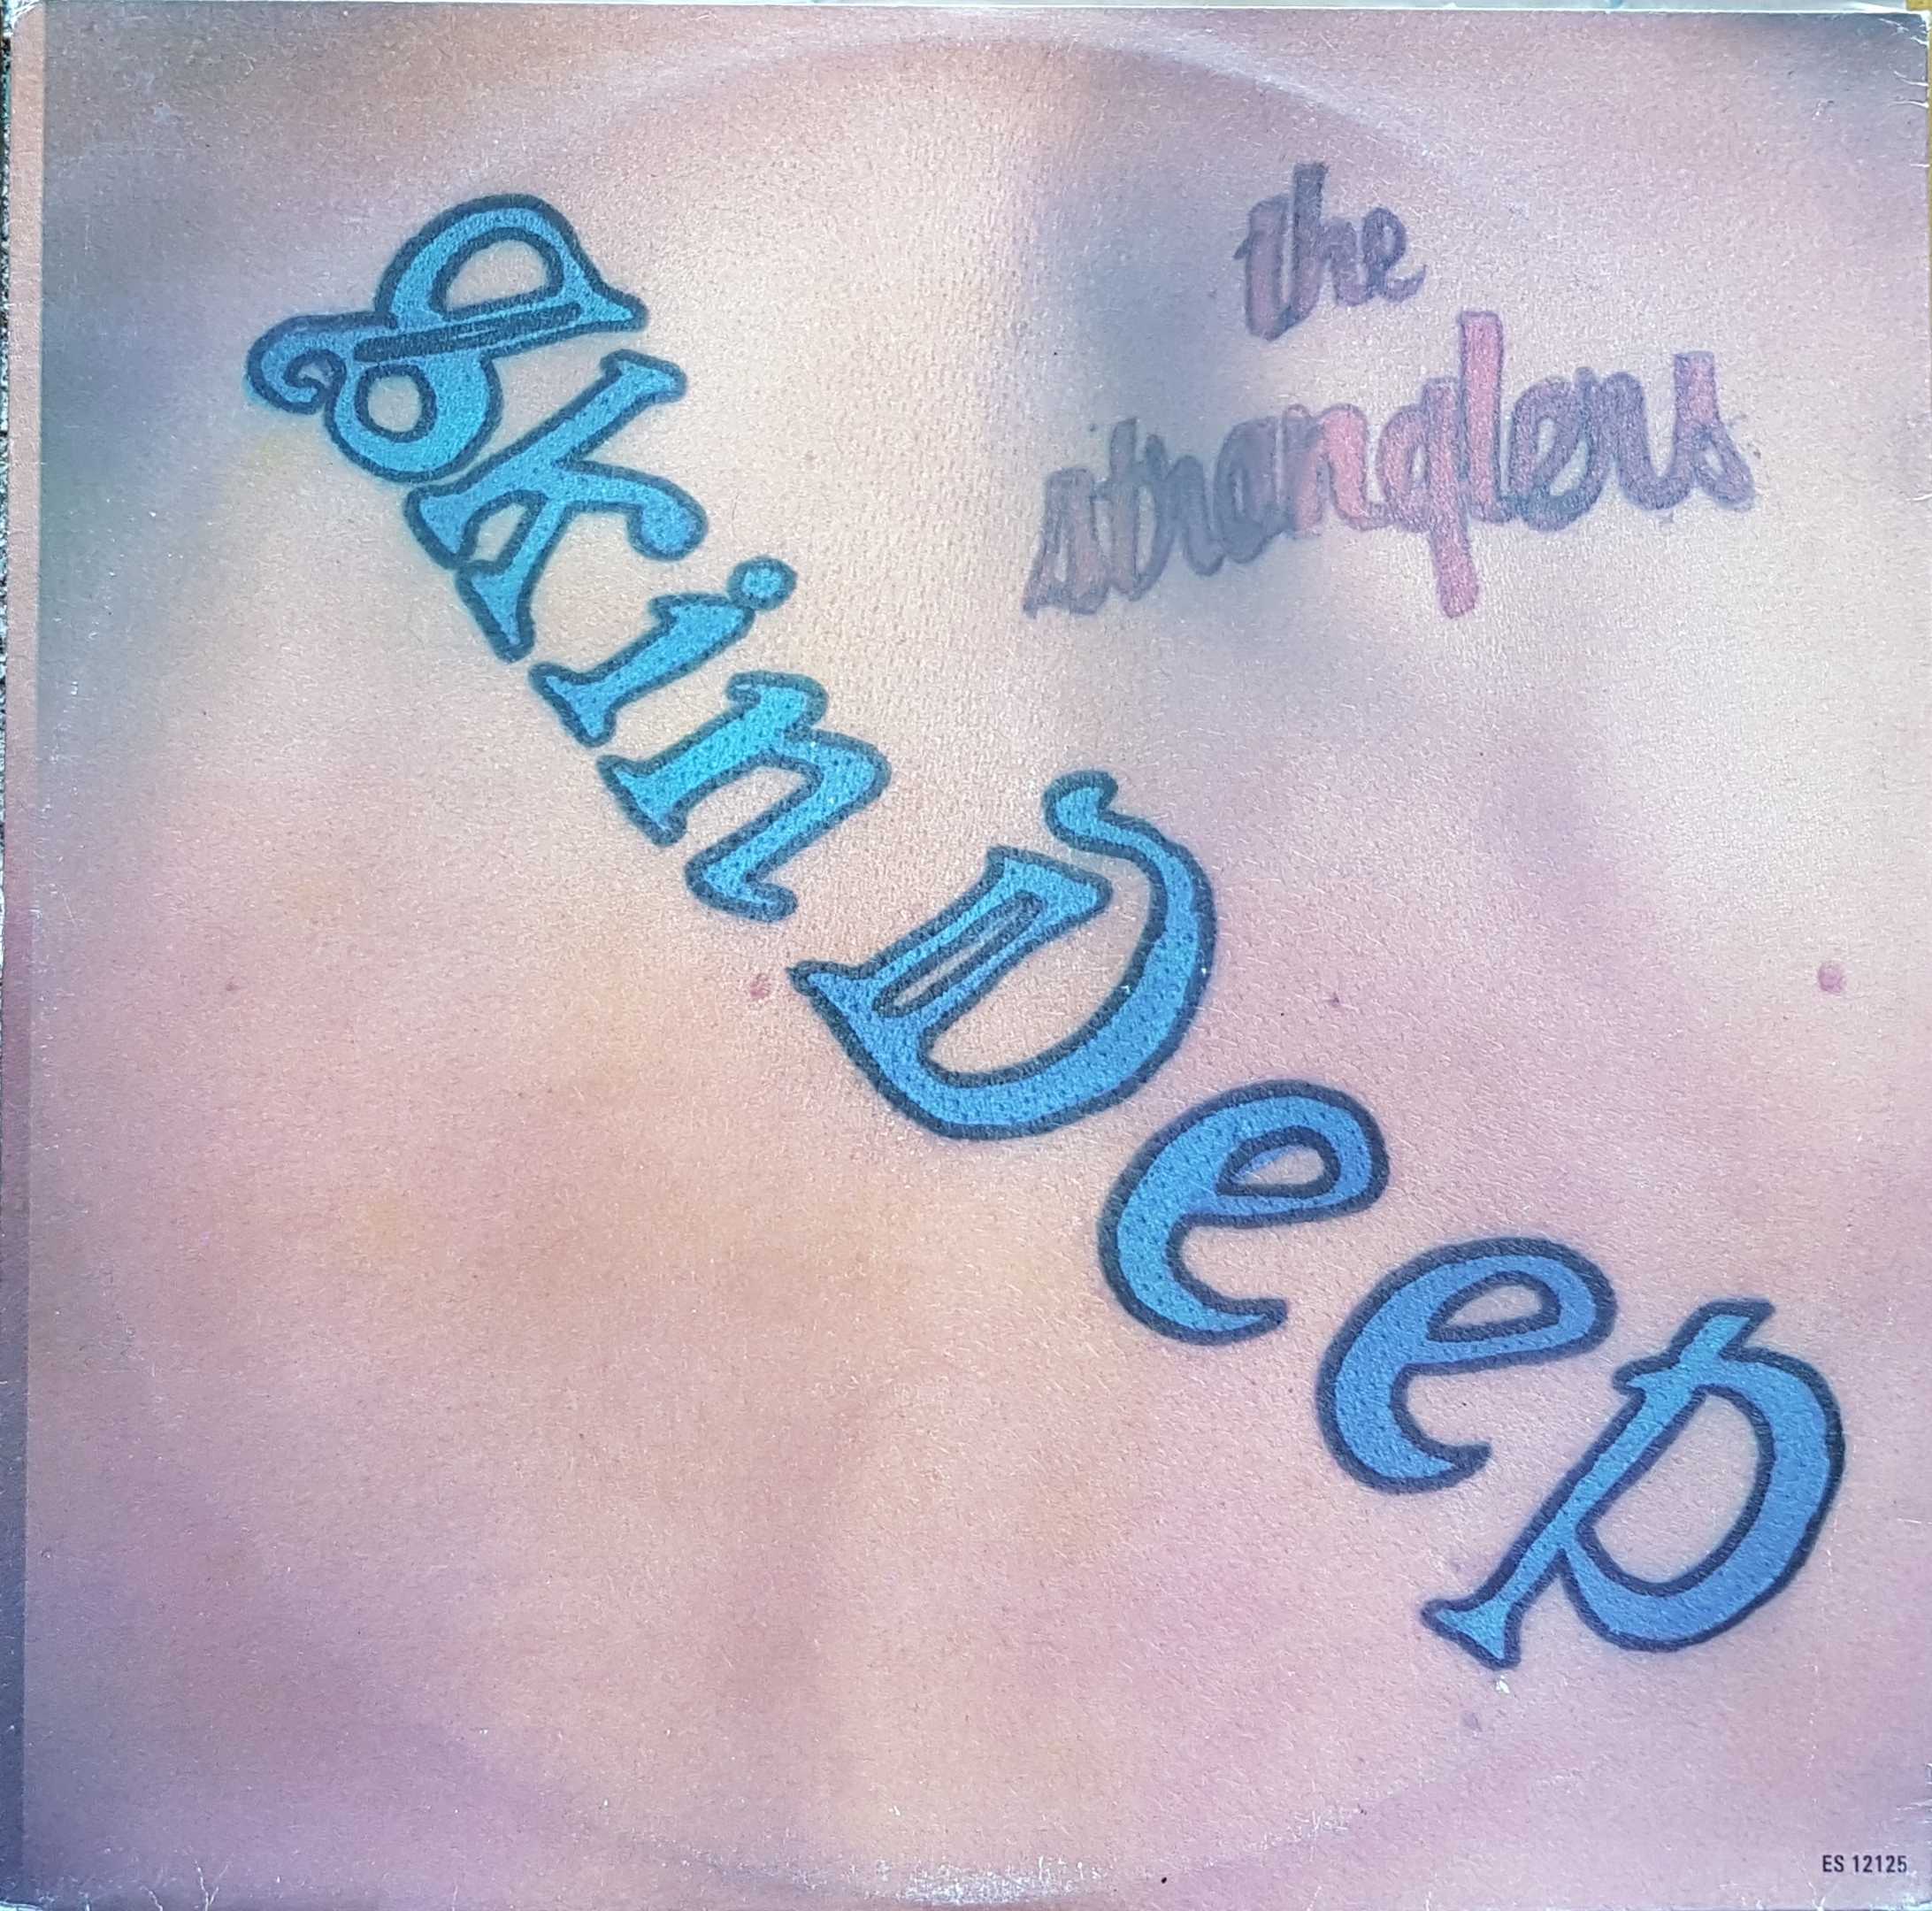 Picture of ES 12125 Skin deep by artist The Stranglers